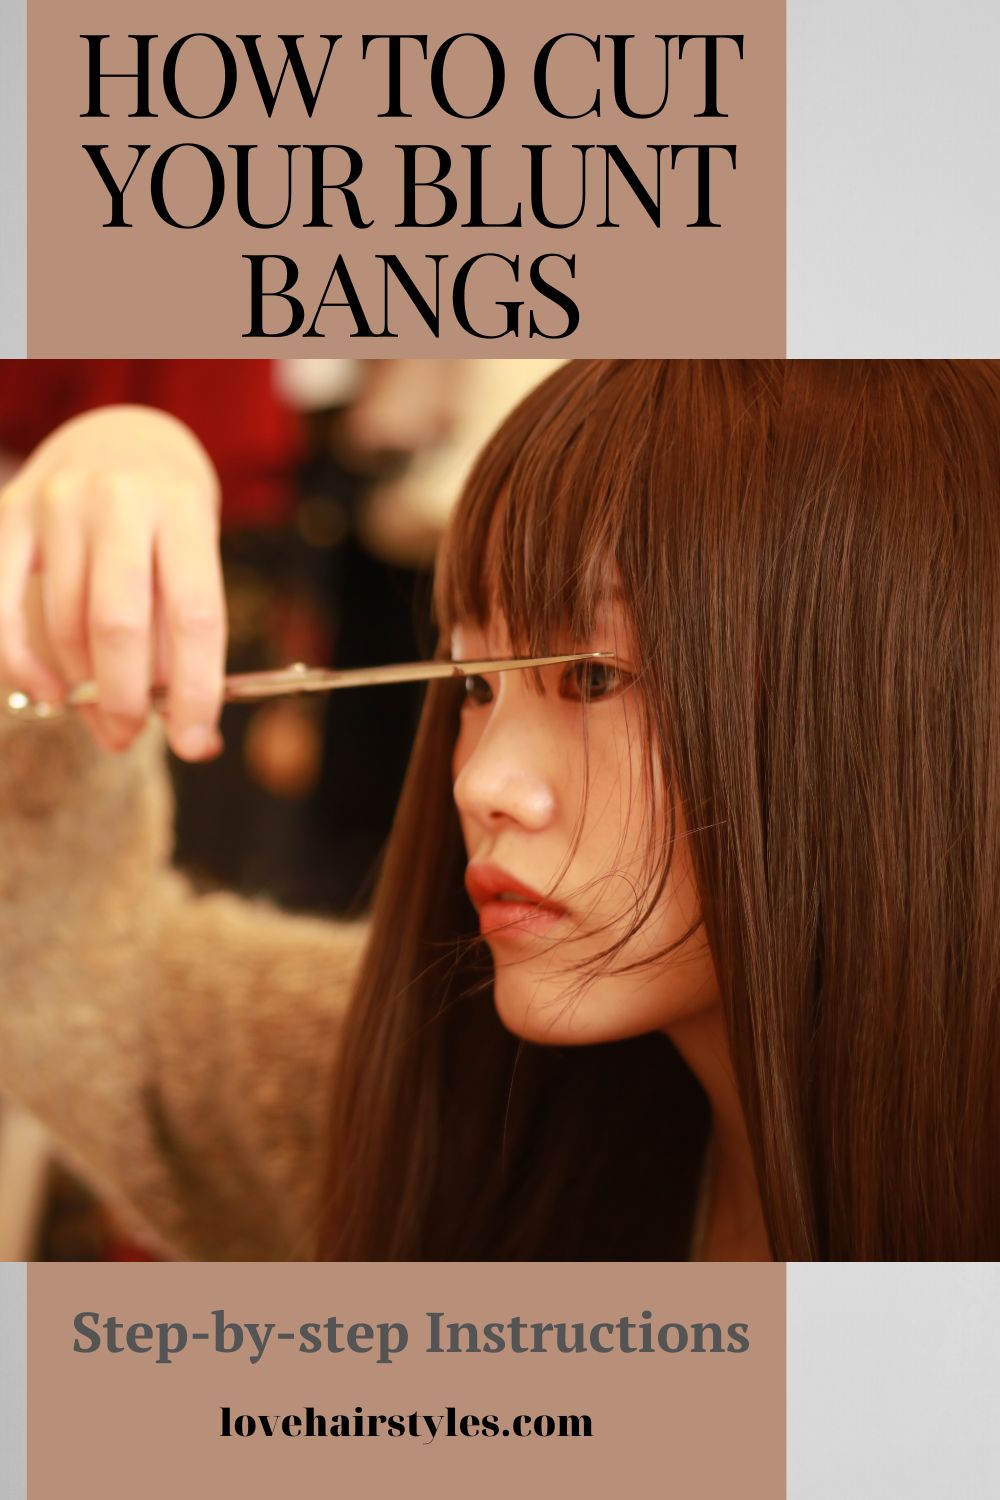 How To Cut Your Blunt Bangs: Step By Step Instructions